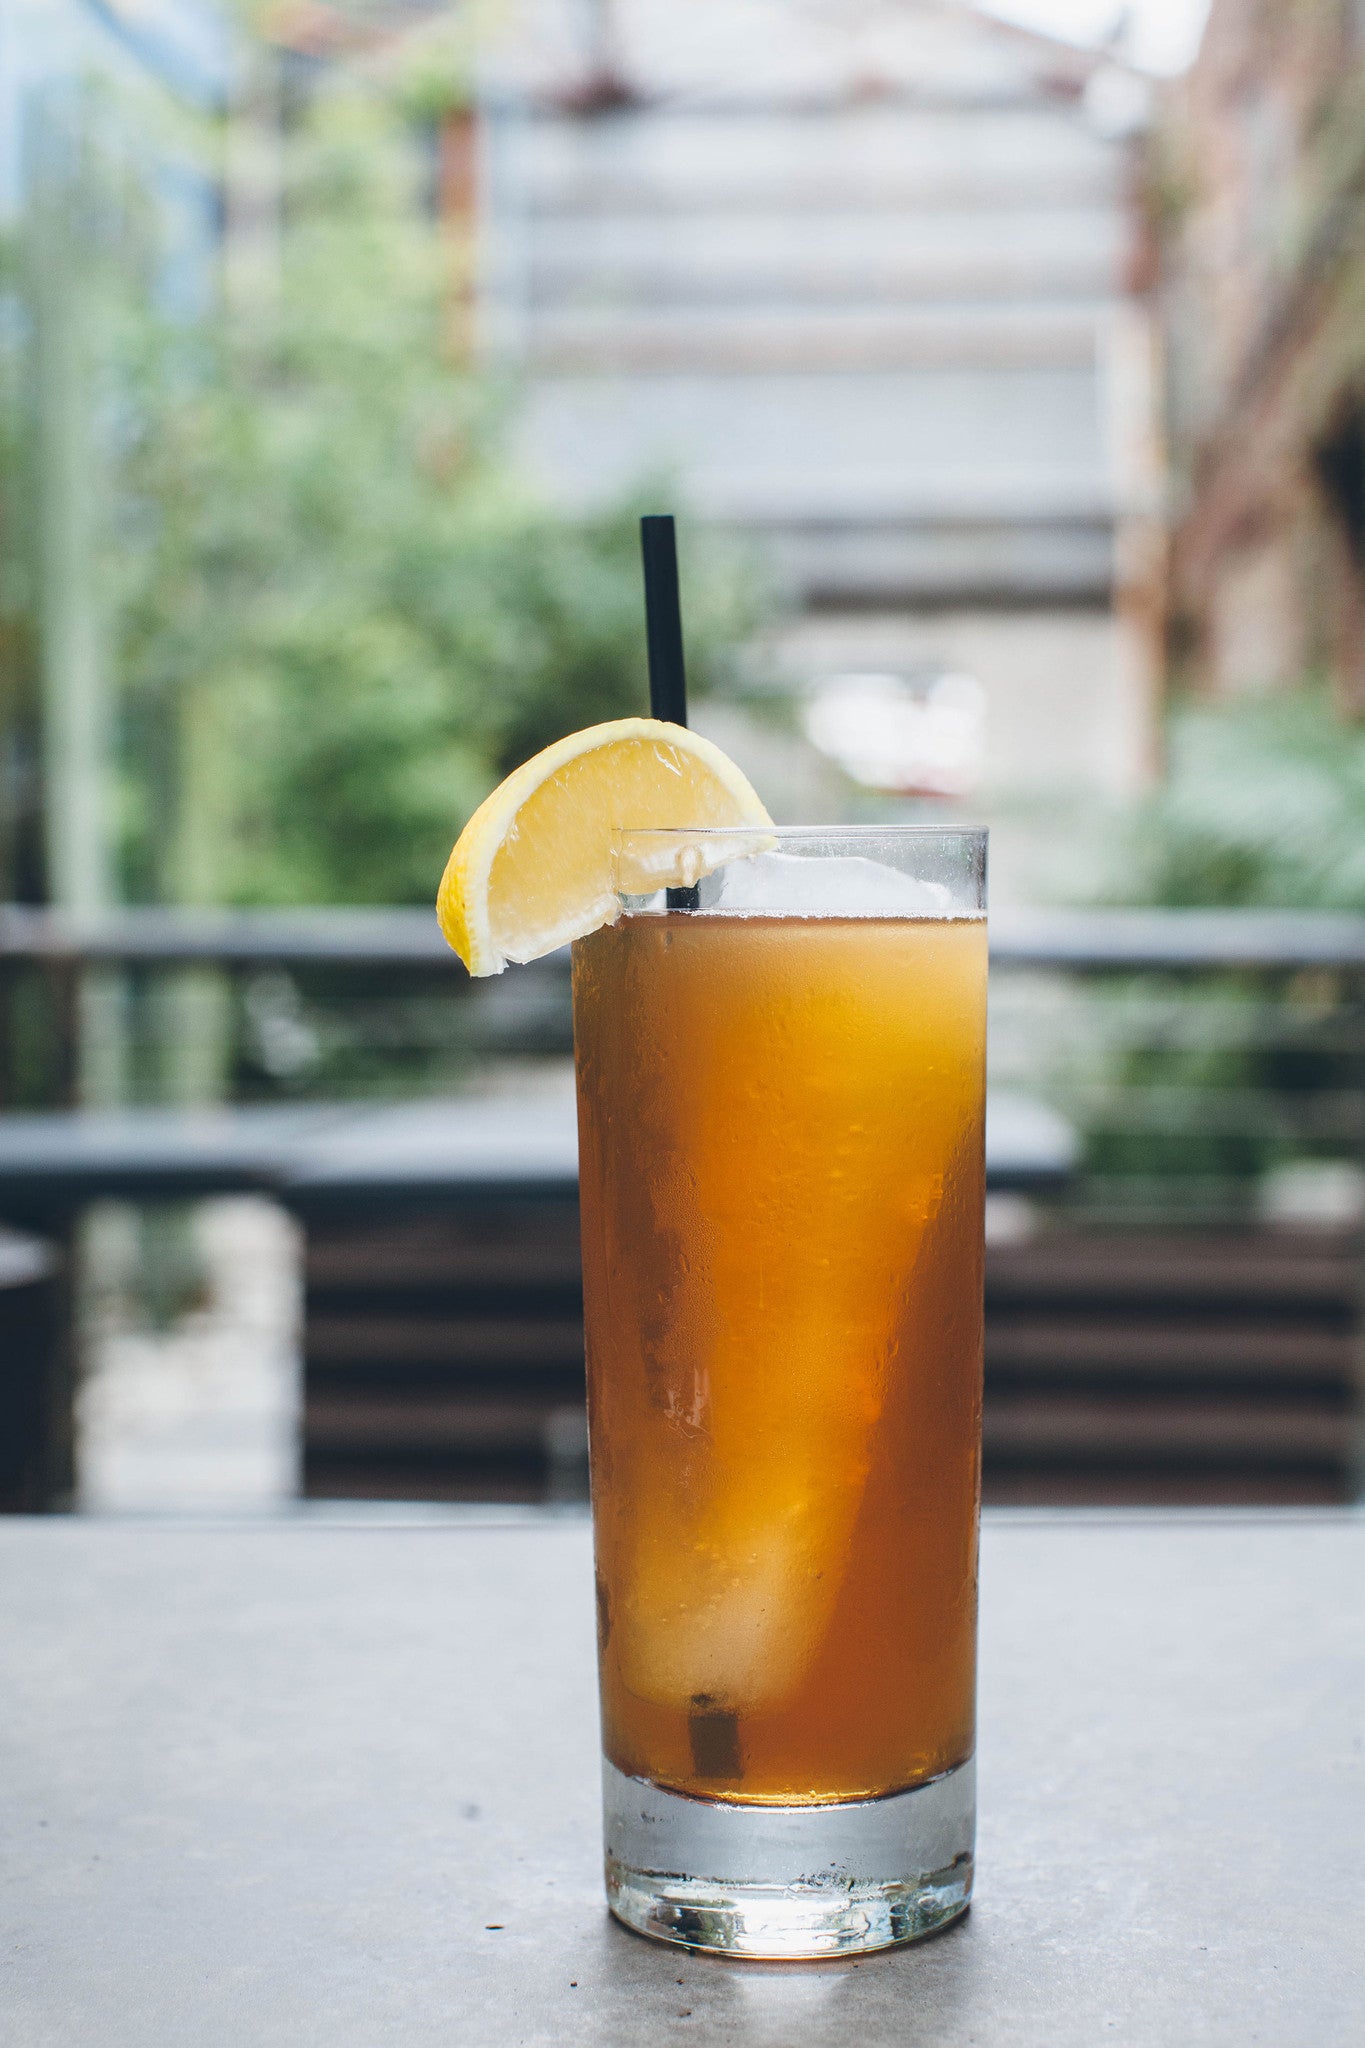 Perfect Your Iced Tea Game in 3 Simple Moves